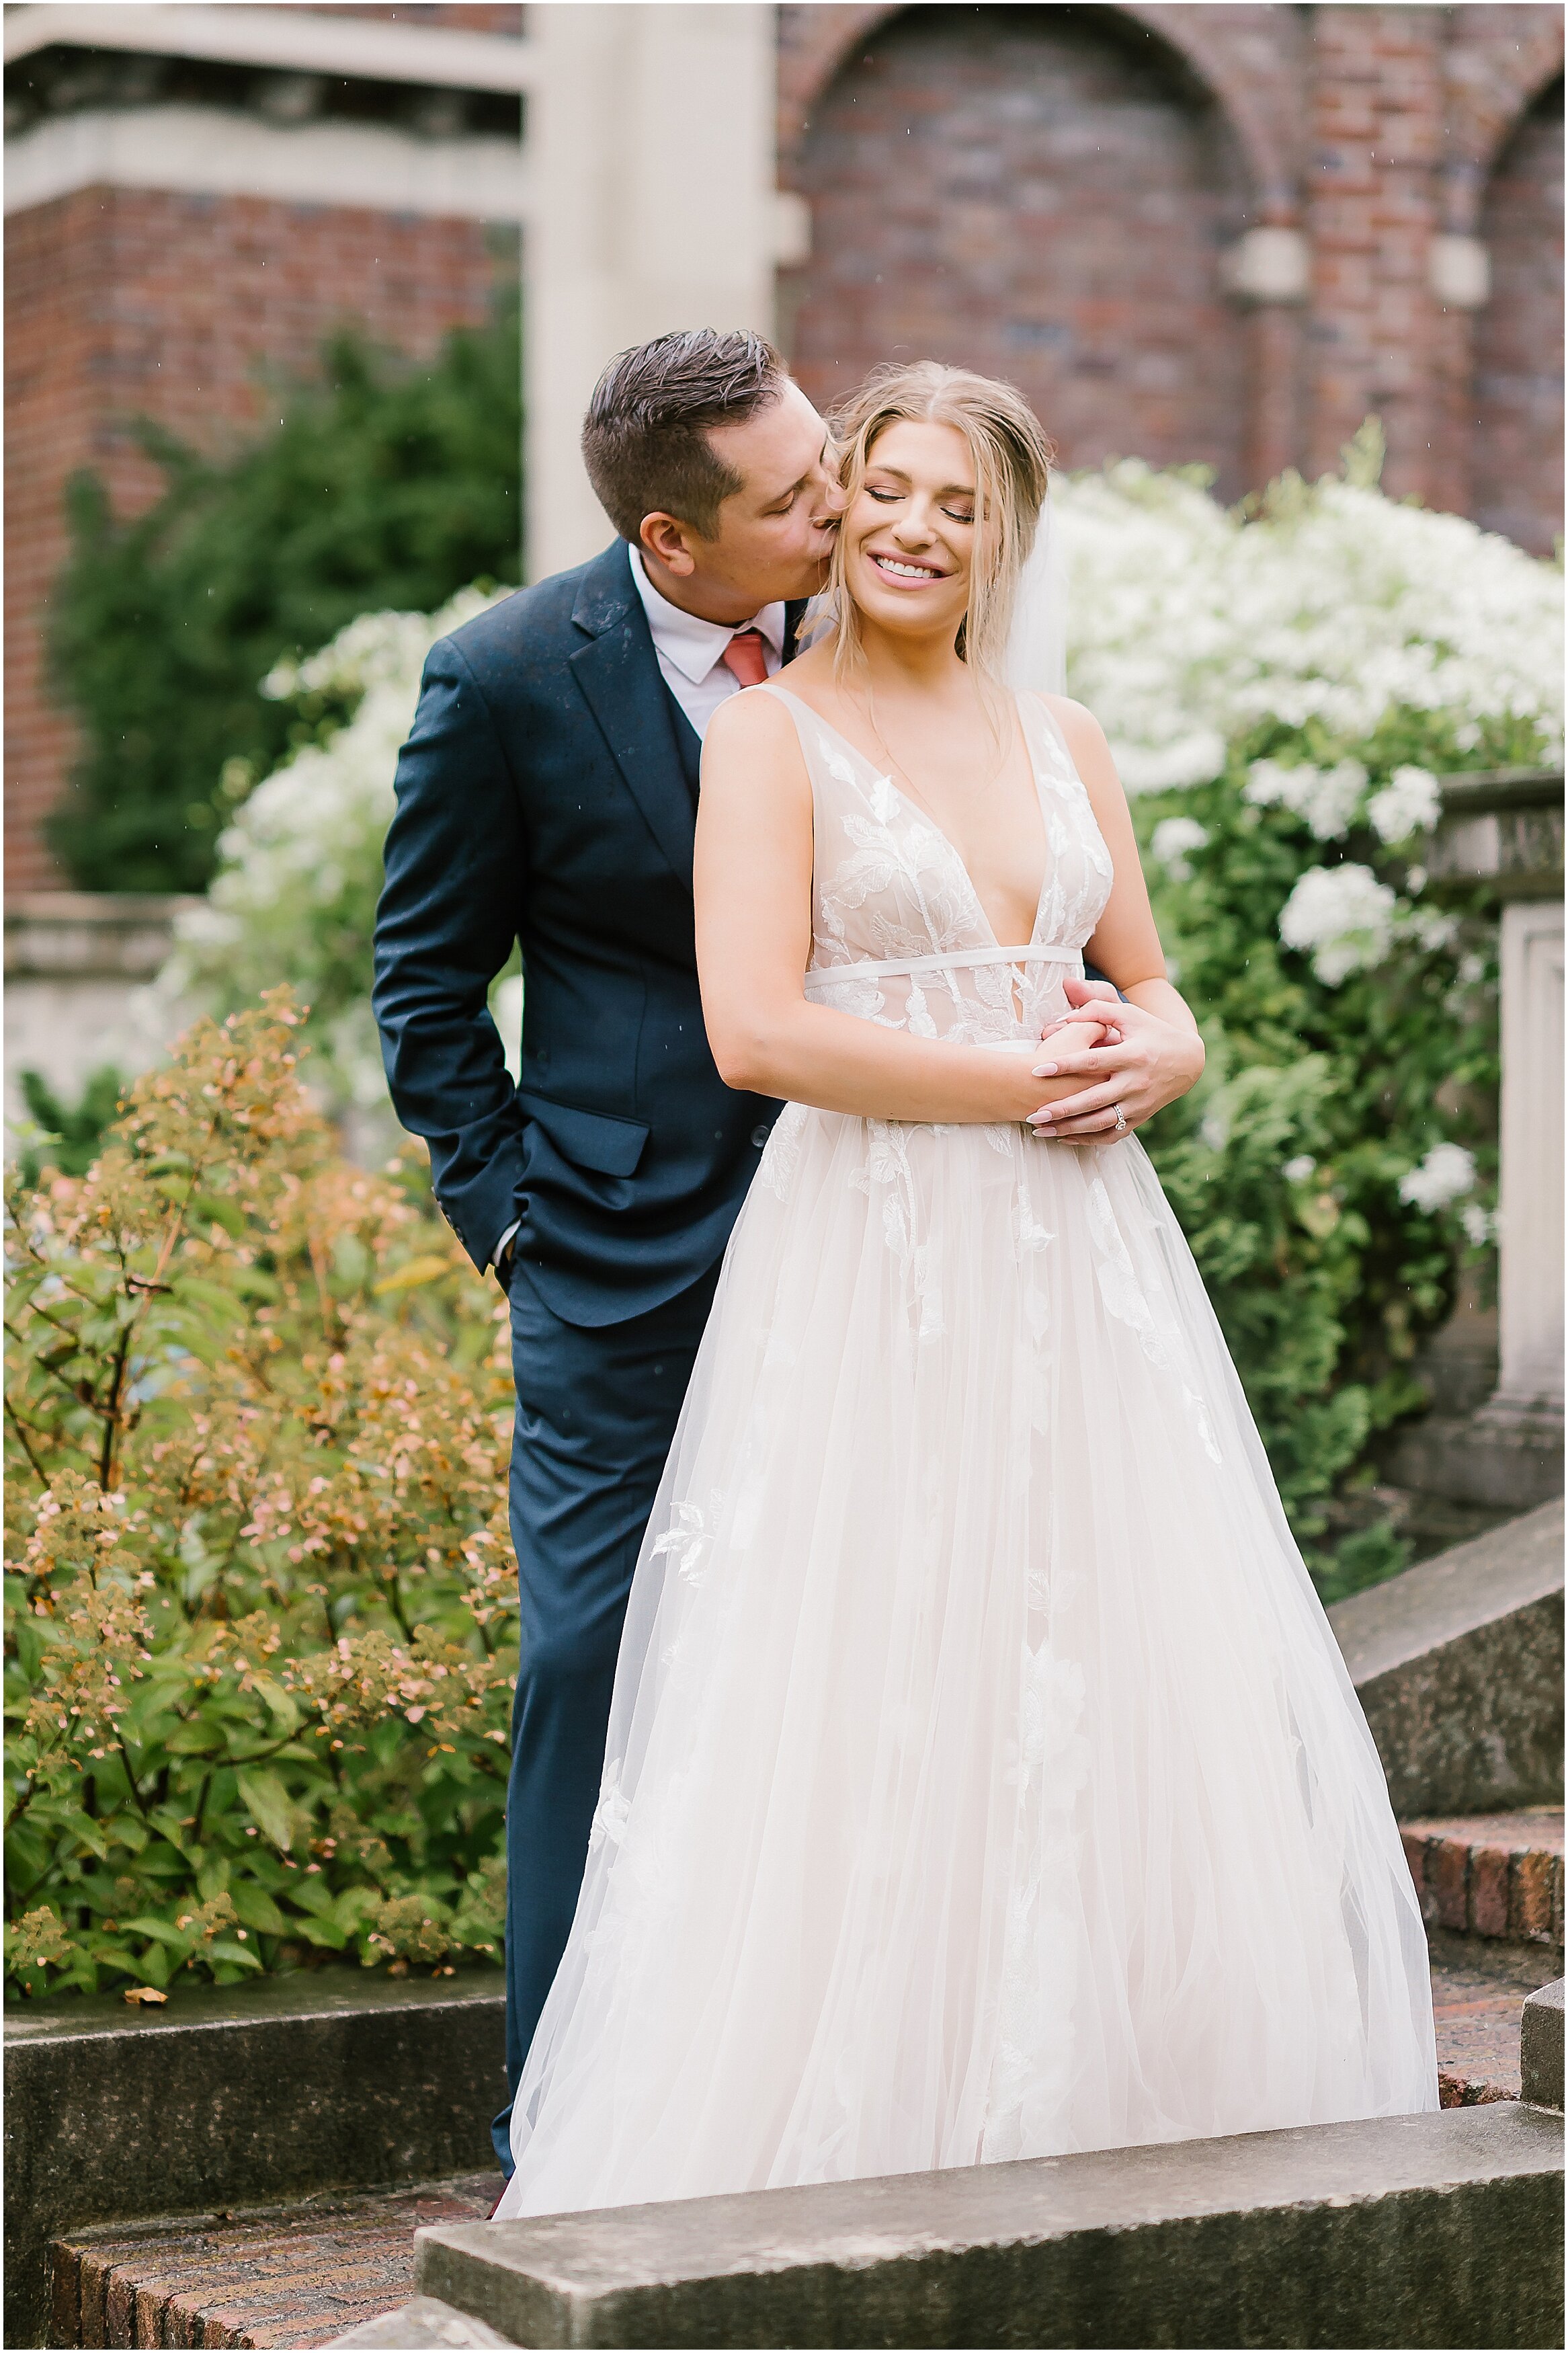 Rebecca Shehorn Photography Colleen and Kyle Inn at Irwin Gardens Wedding-744_The Commons Columbus Inn at Irwin Garden Indianapolis Wedding Photographer.jpg